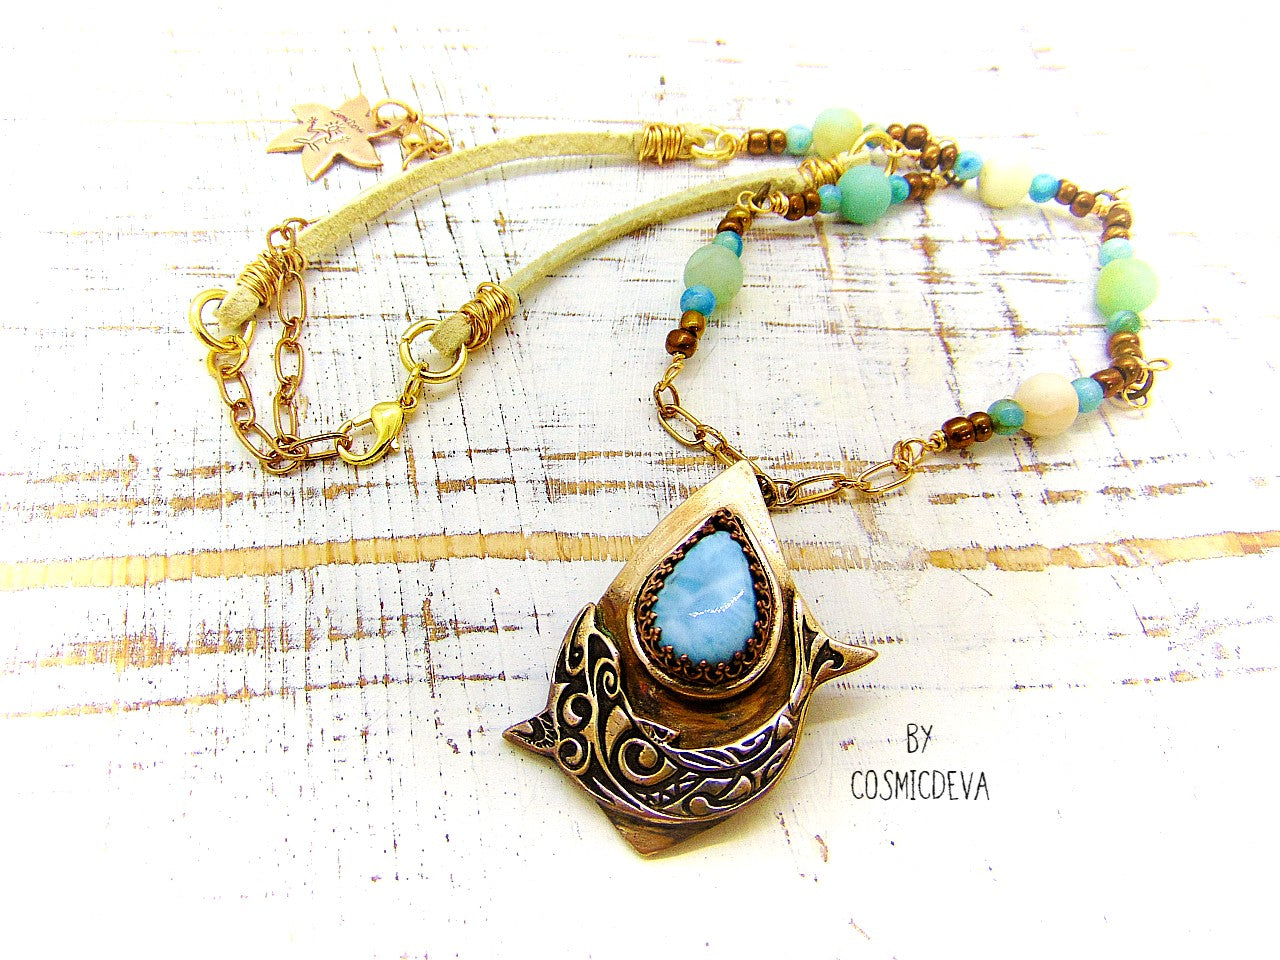 Bring harmony to your life with this beautiful Dolphin Spirit Animal Larimar Bronze Necklace. Handcrafted from solid bronze and adorned with a larimar gemstone, this one-of-a-kind pendant symbolizes the wisdom of Atlantis and healing power of dolphins - sure to bring peace and balance to your life. Finished with white leather and aqua colored jasper and amazonite gemstone beads.